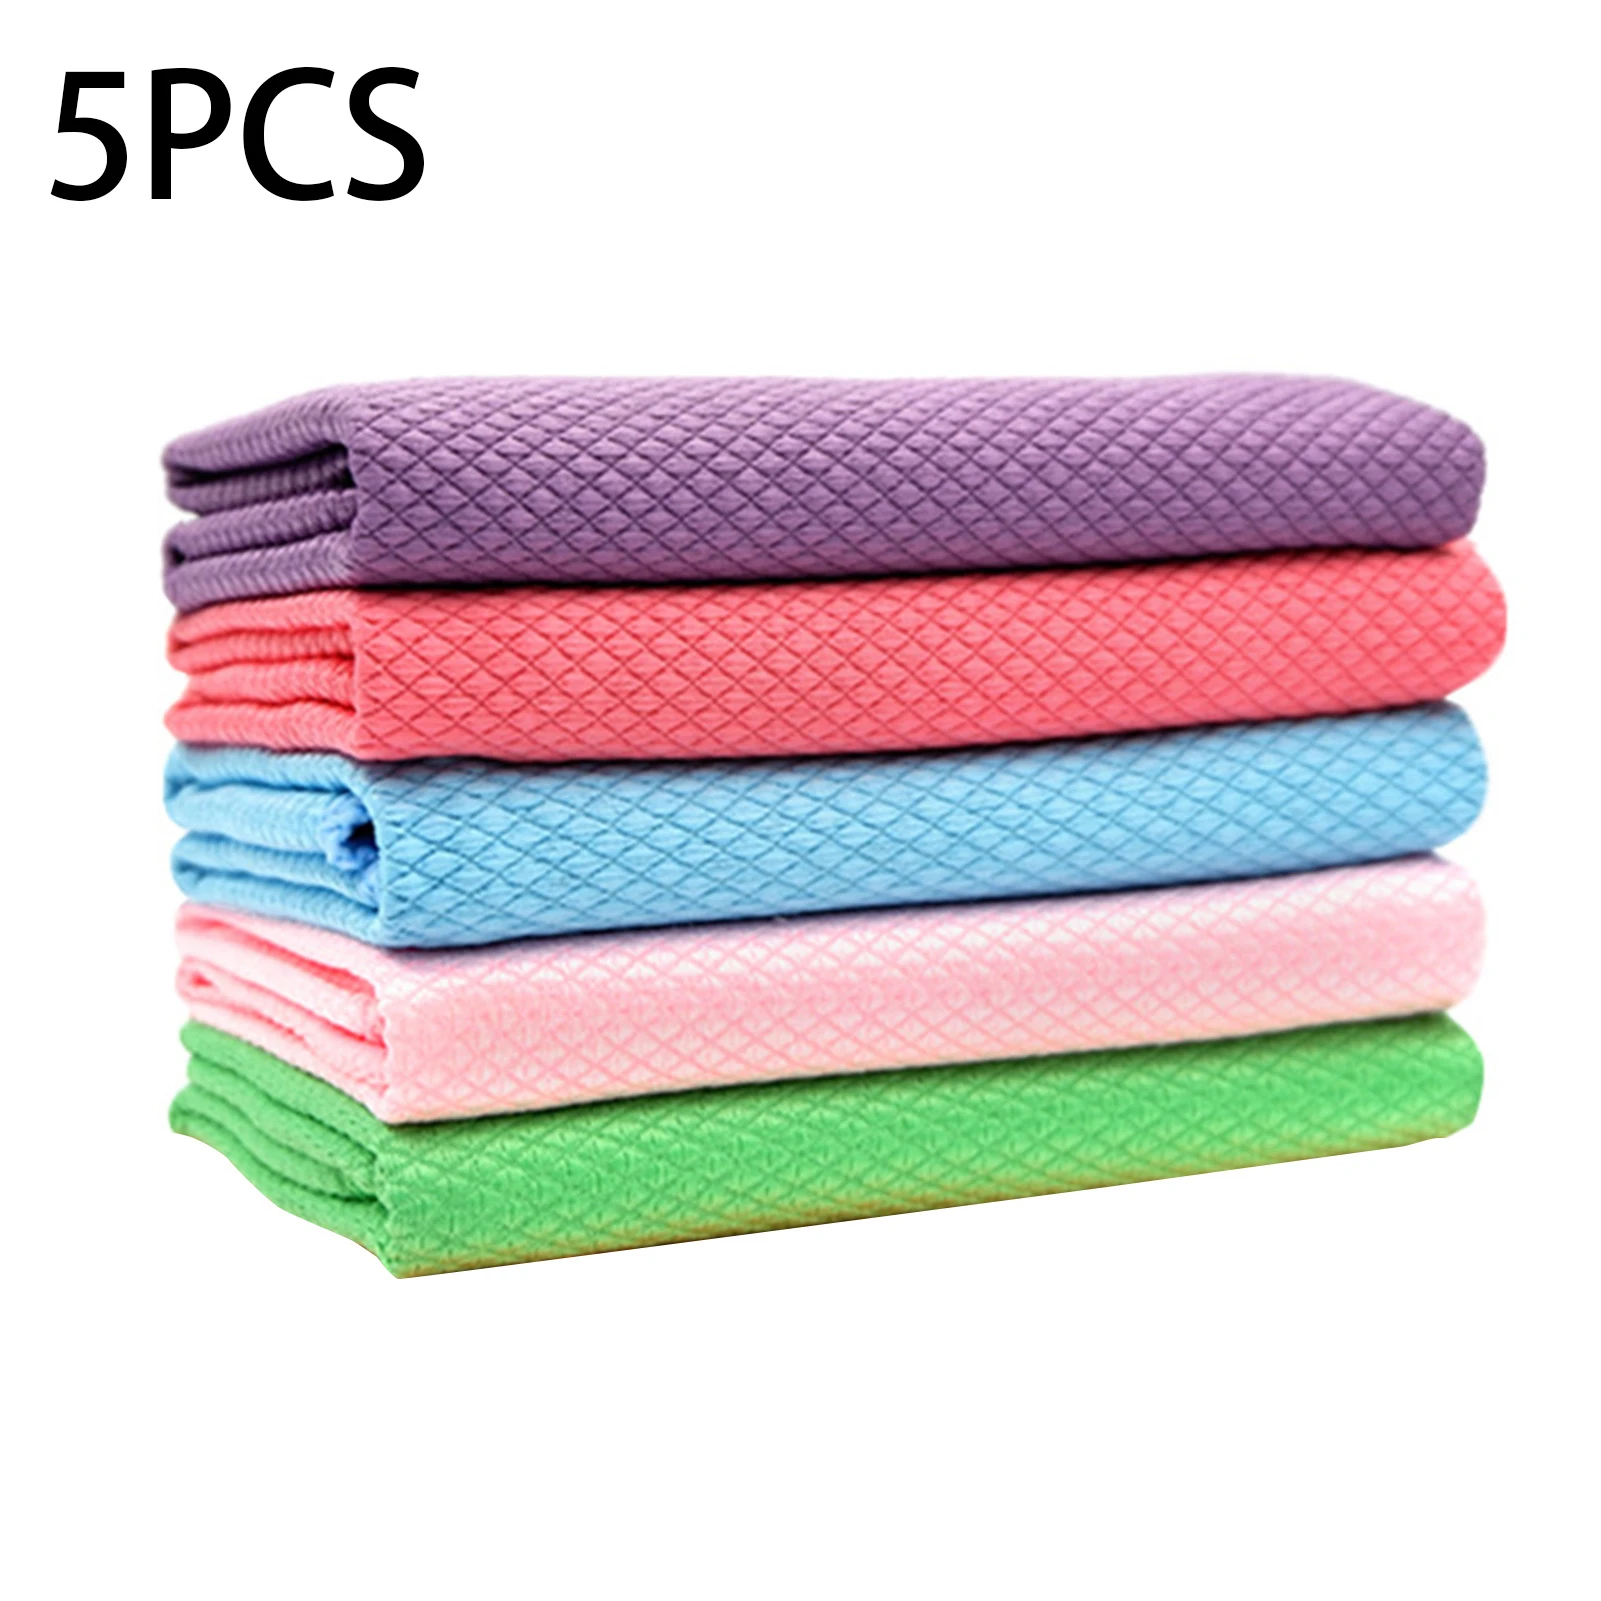 5Pcs Kitchen Anti-Grease Wiping Rags Efficient Fish Scale Wipe Cloth Cleaning Cloth Home Washing Dish Cleaning Towel